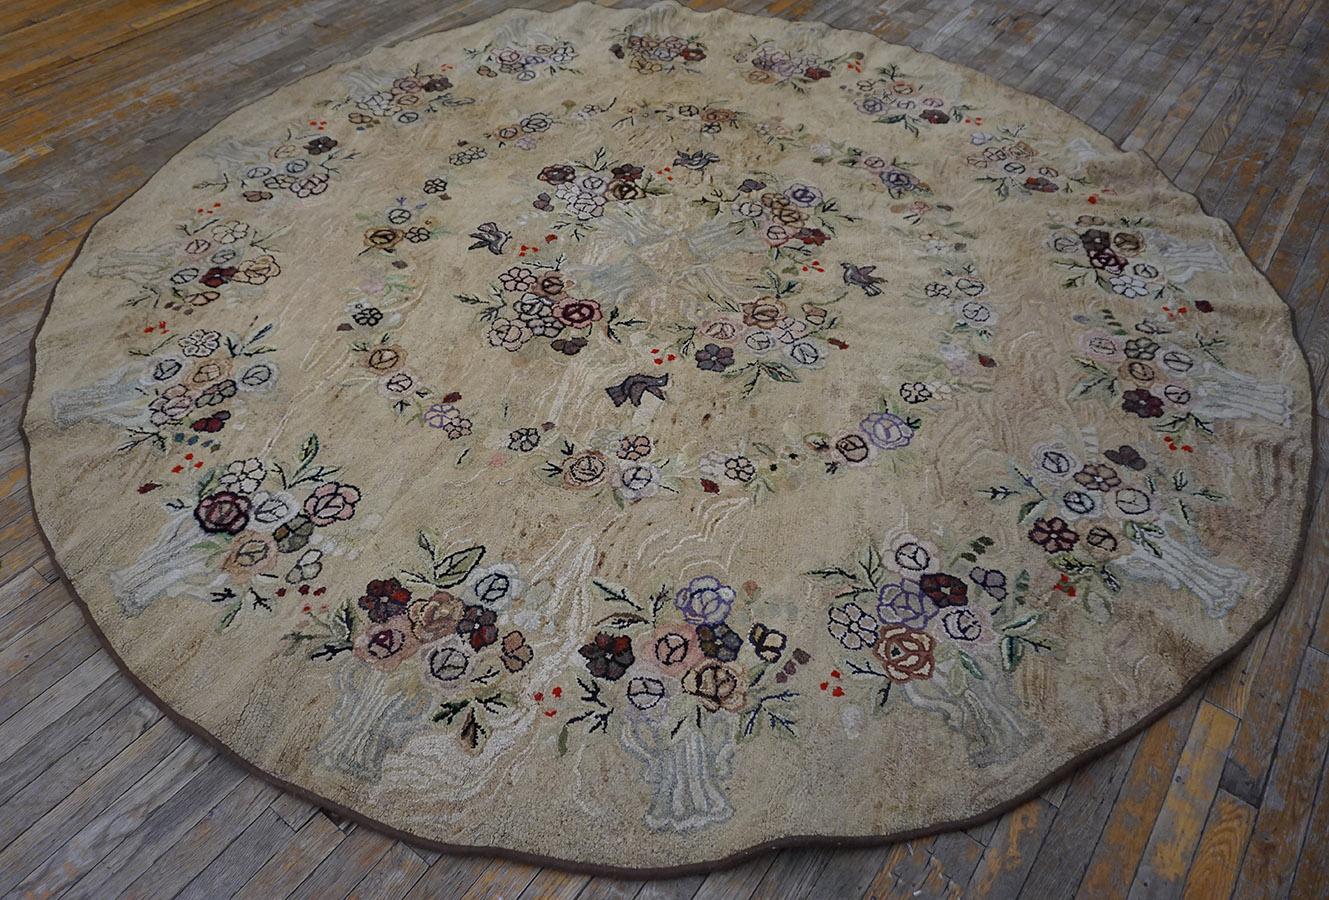 Early 20th Century American Hooked Rug ( 9' x 9' - 275 x 275 ) For Sale 4